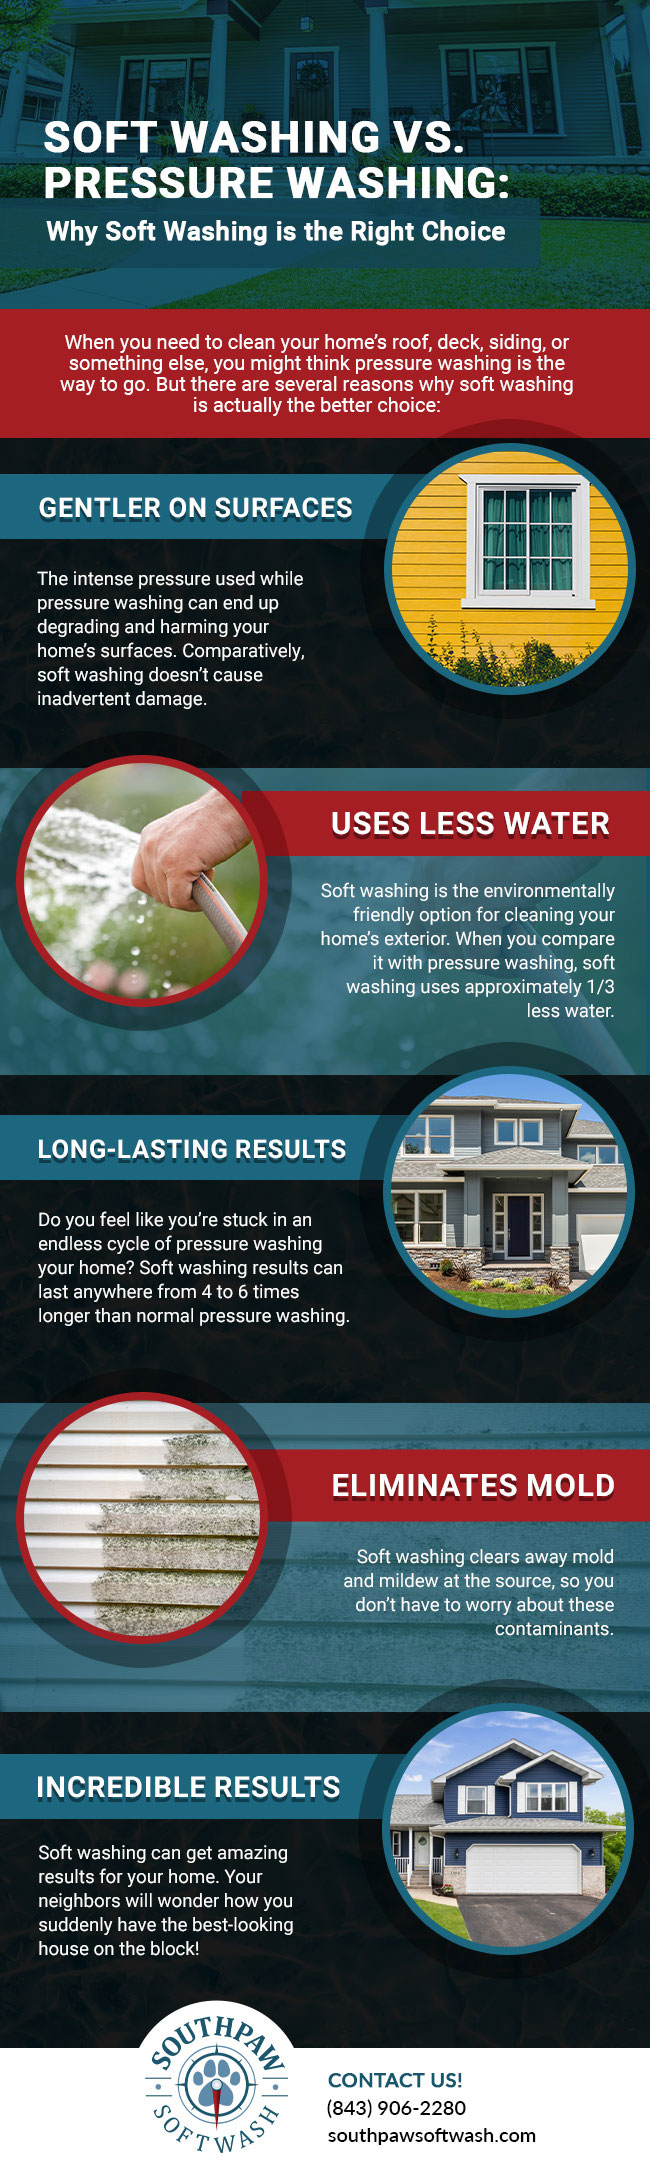 Soft Washing vs. Pressure Washing: Why Soft Washing is the Right Choice 